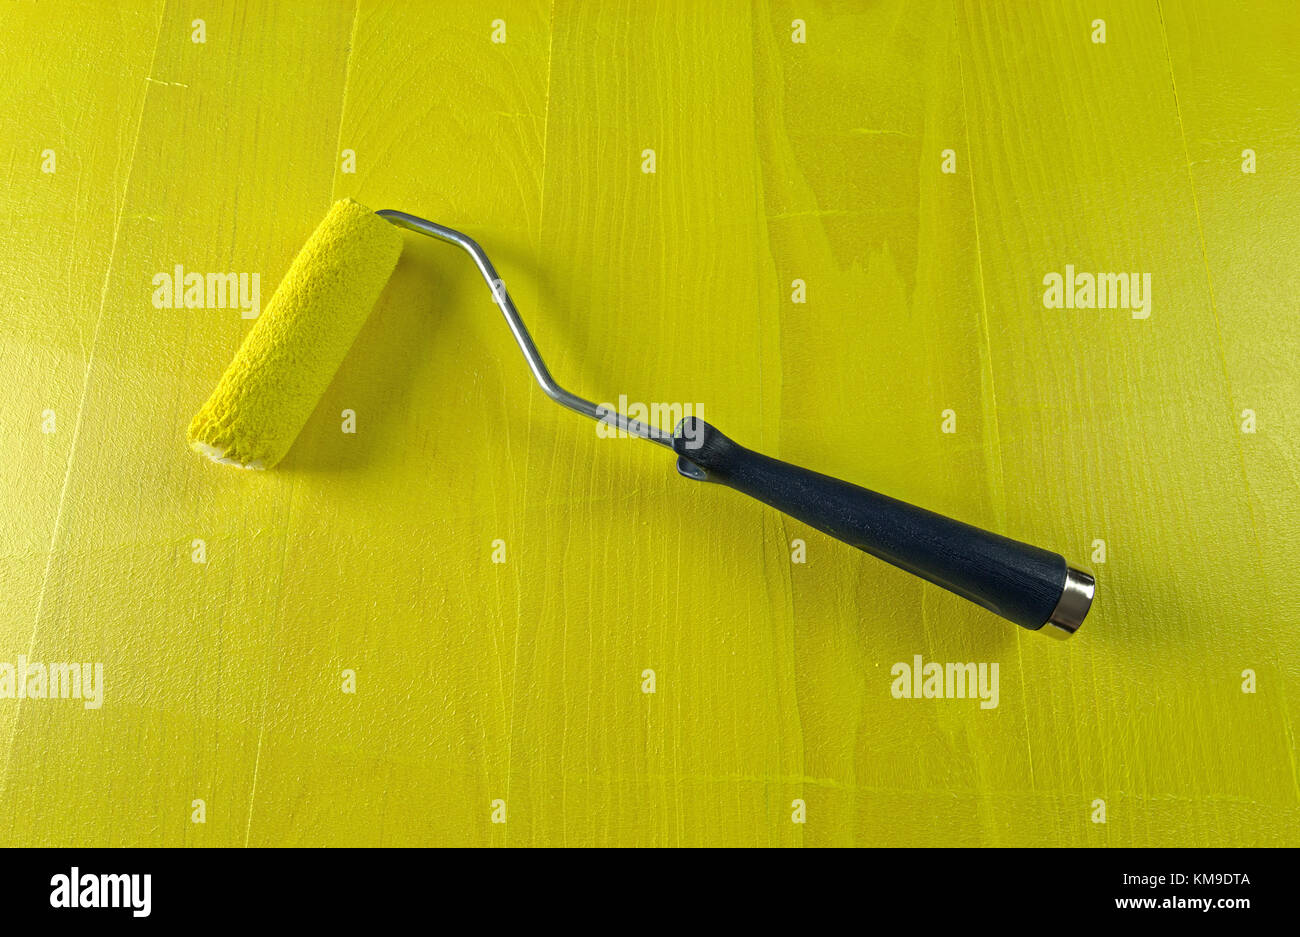 A saturated smooth texture paint roller atop bright yellow painted pine wood. Stock Photo